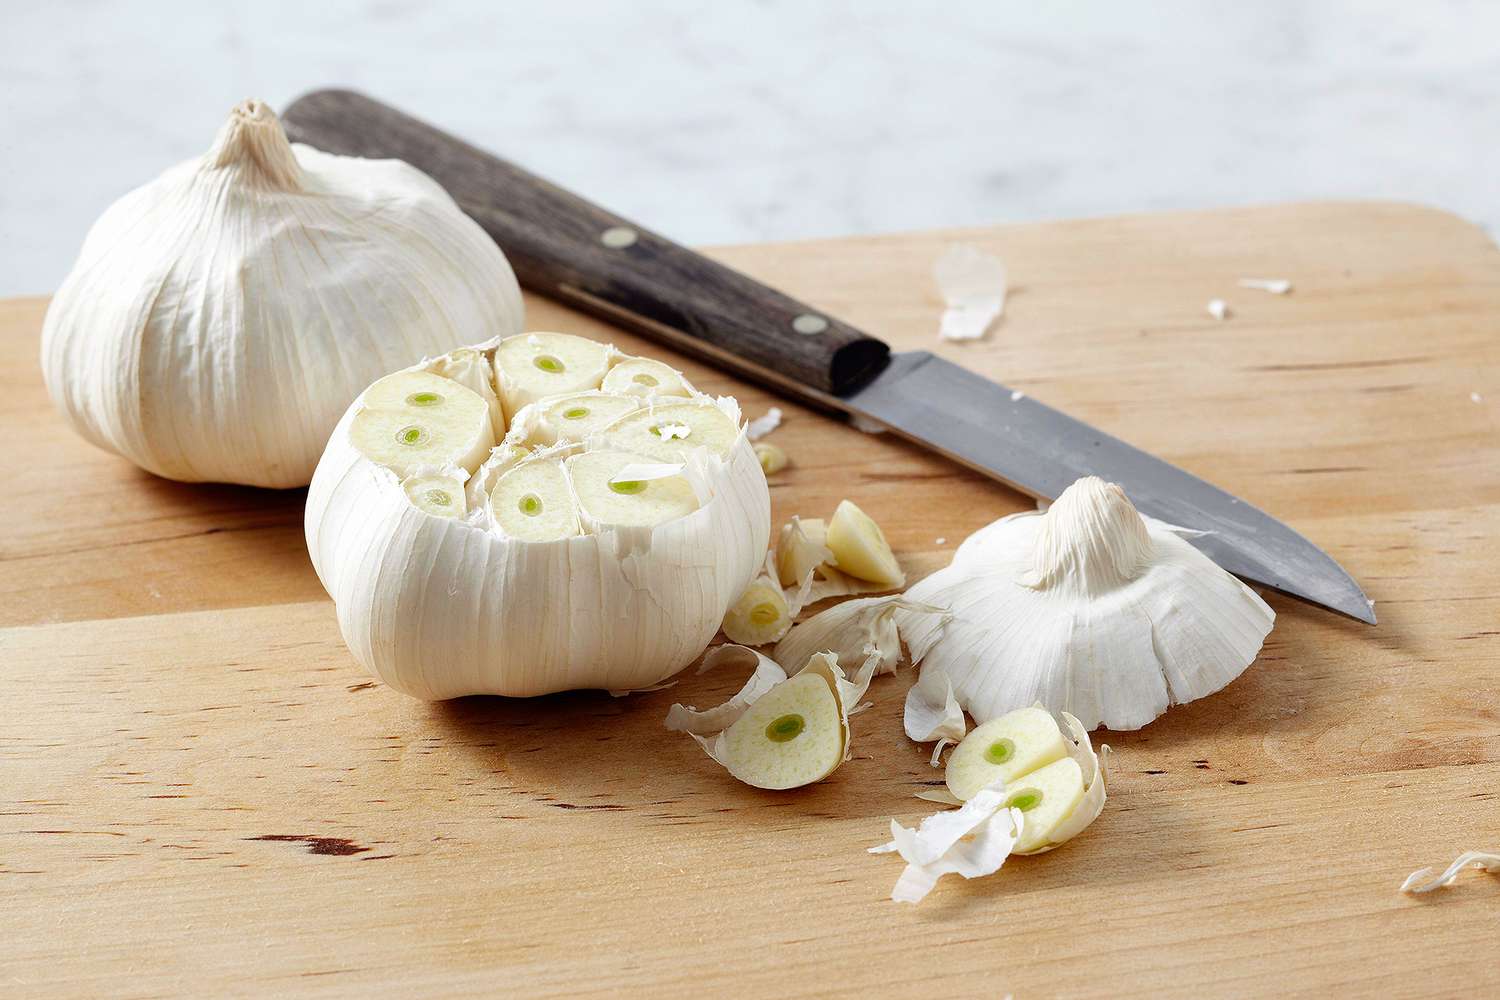 Garlic can be used as a natural pesticide and fungicide